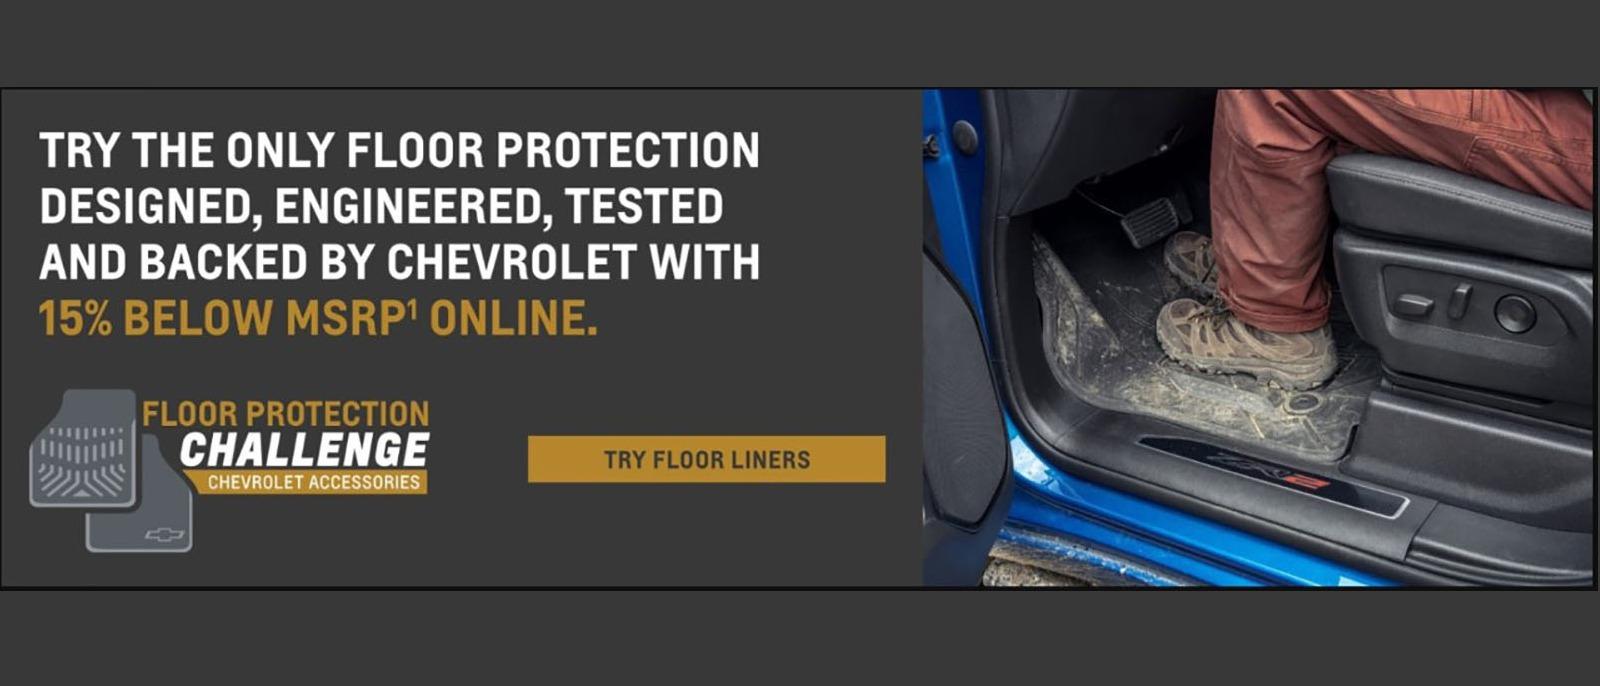 Try the only floor protection designed, engineered, tested and backed by Chevrolet with 15% below MSRP online.